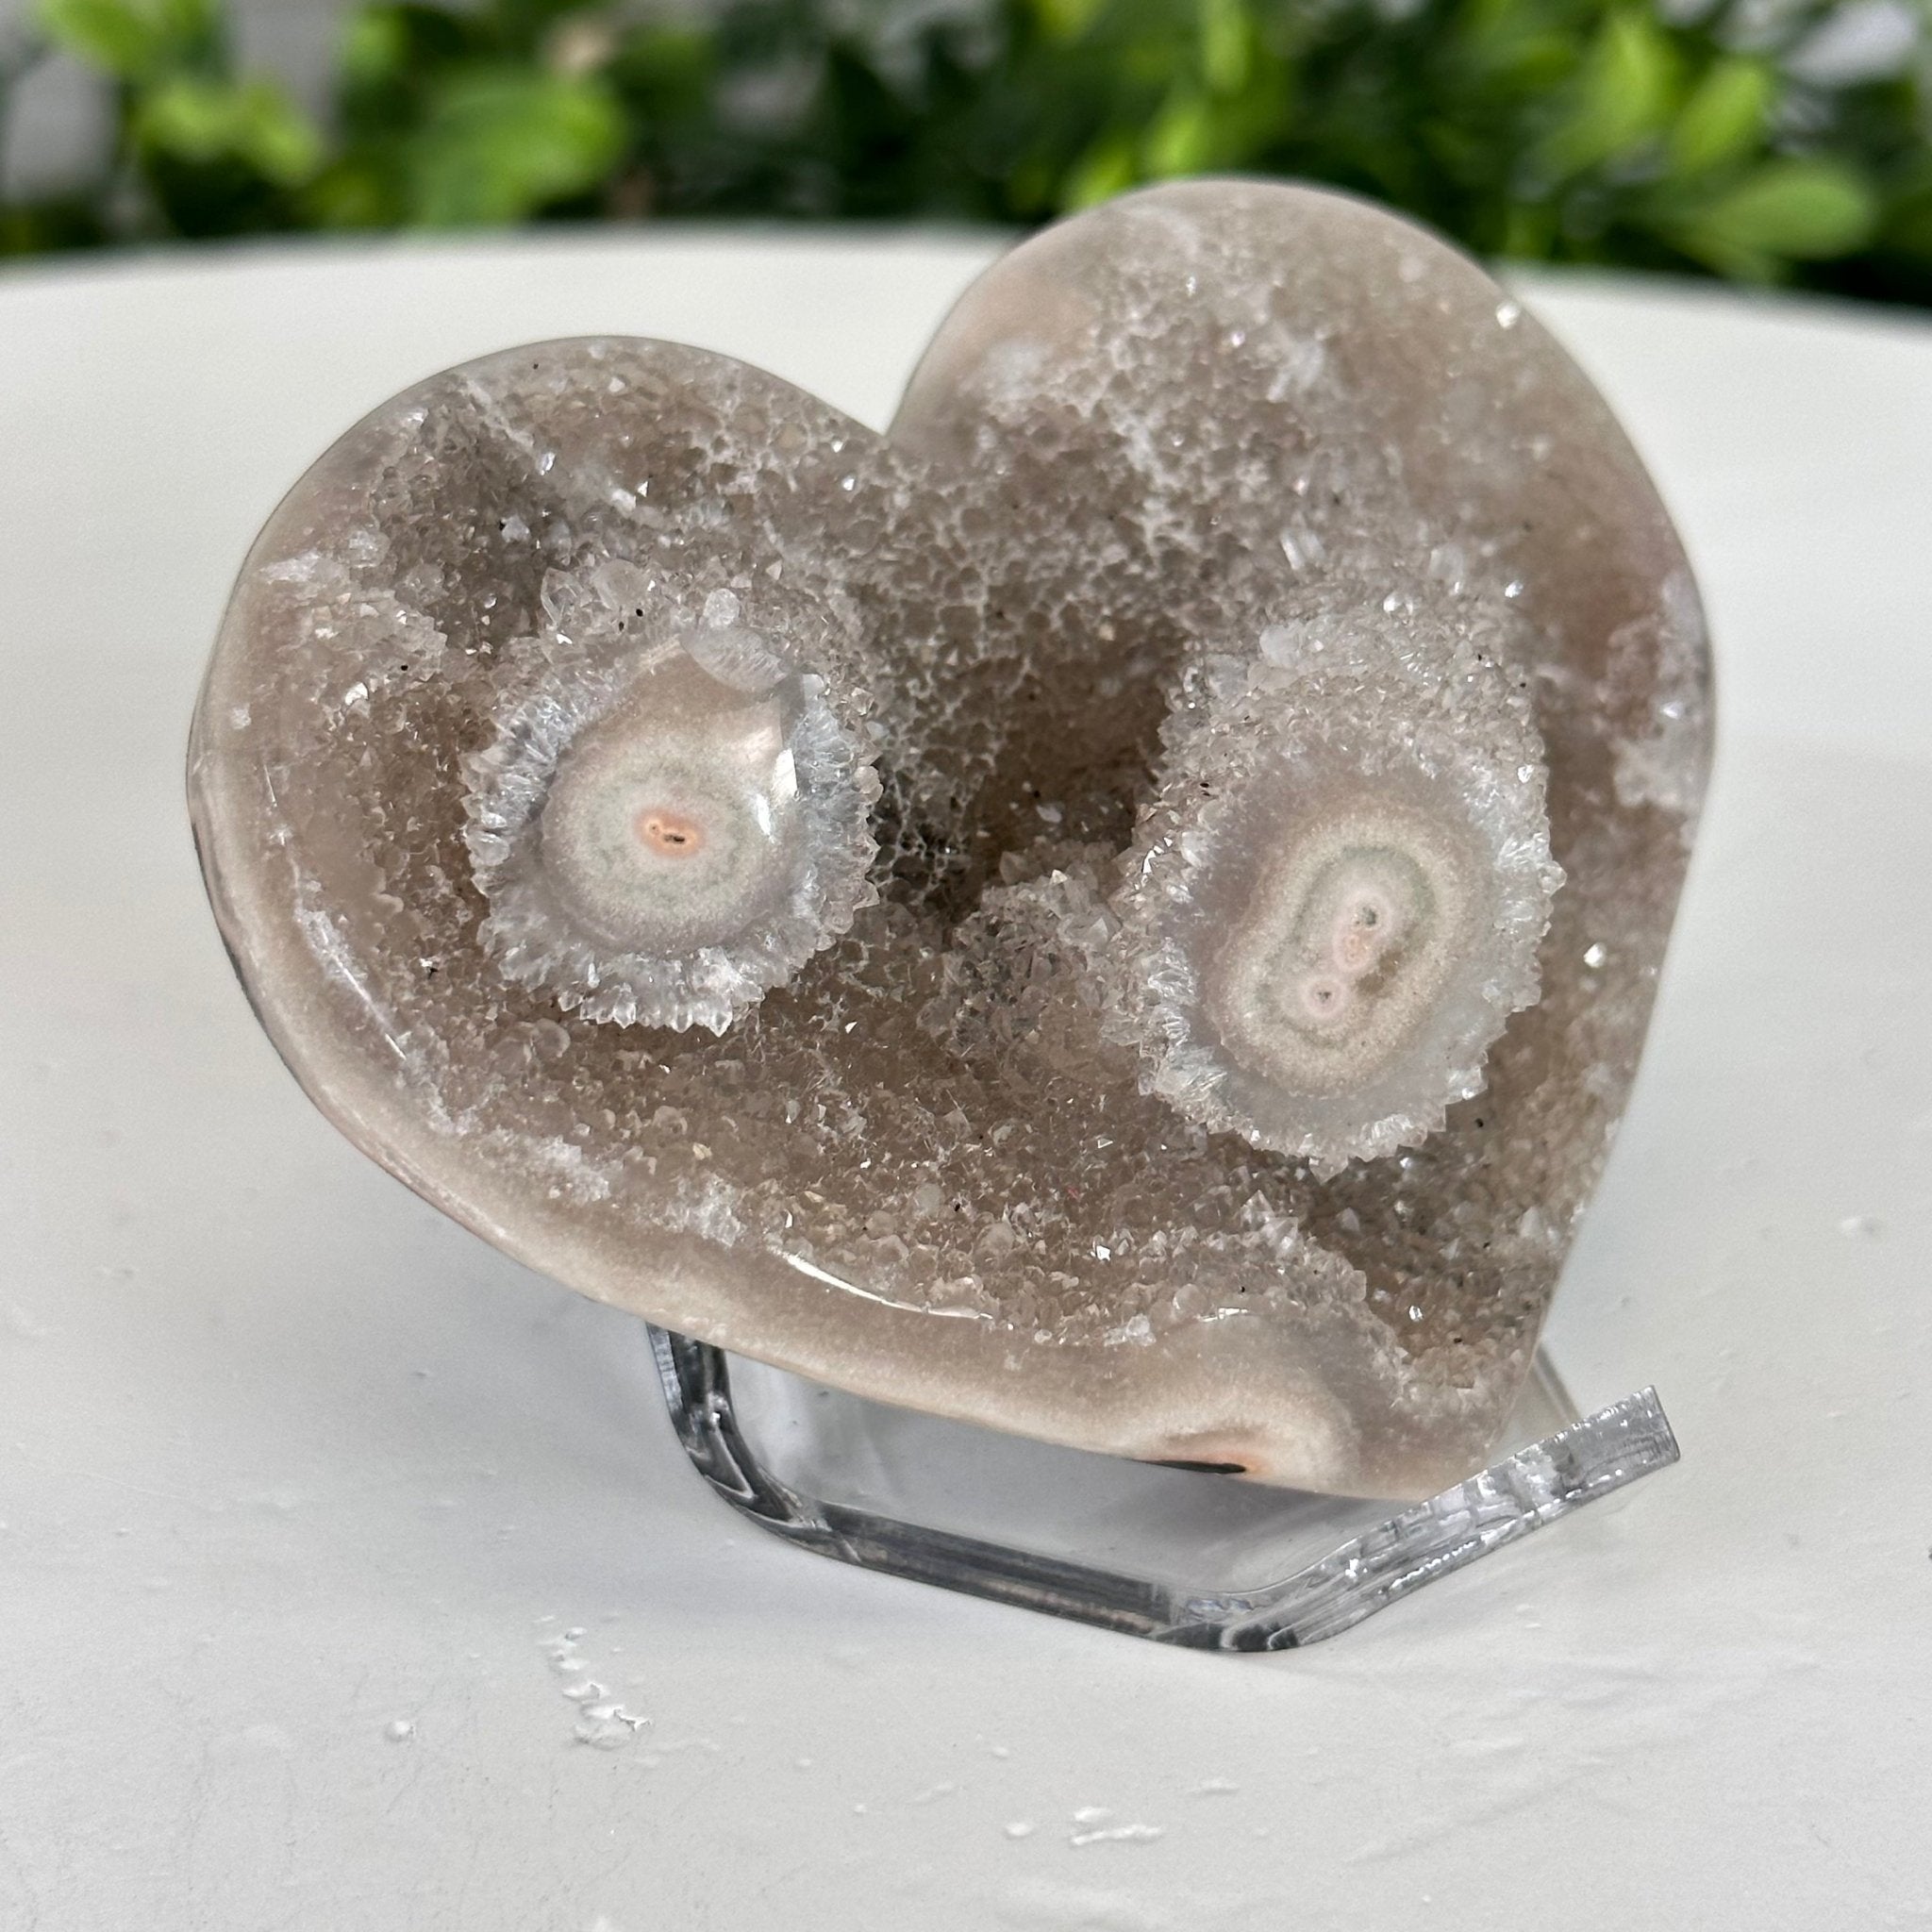 Extra Plus Quality Amethyst Heart Geode on an Acrylic Stand, 0.3 lbs & 2" Tall #5462-0080 by Brazil Gems - Brazil GemsBrazil GemsExtra Plus Quality Amethyst Heart Geode on an Acrylic Stand, 0.3 lbs & 2" Tall #5462-0080 by Brazil GemsHearts5462-0080